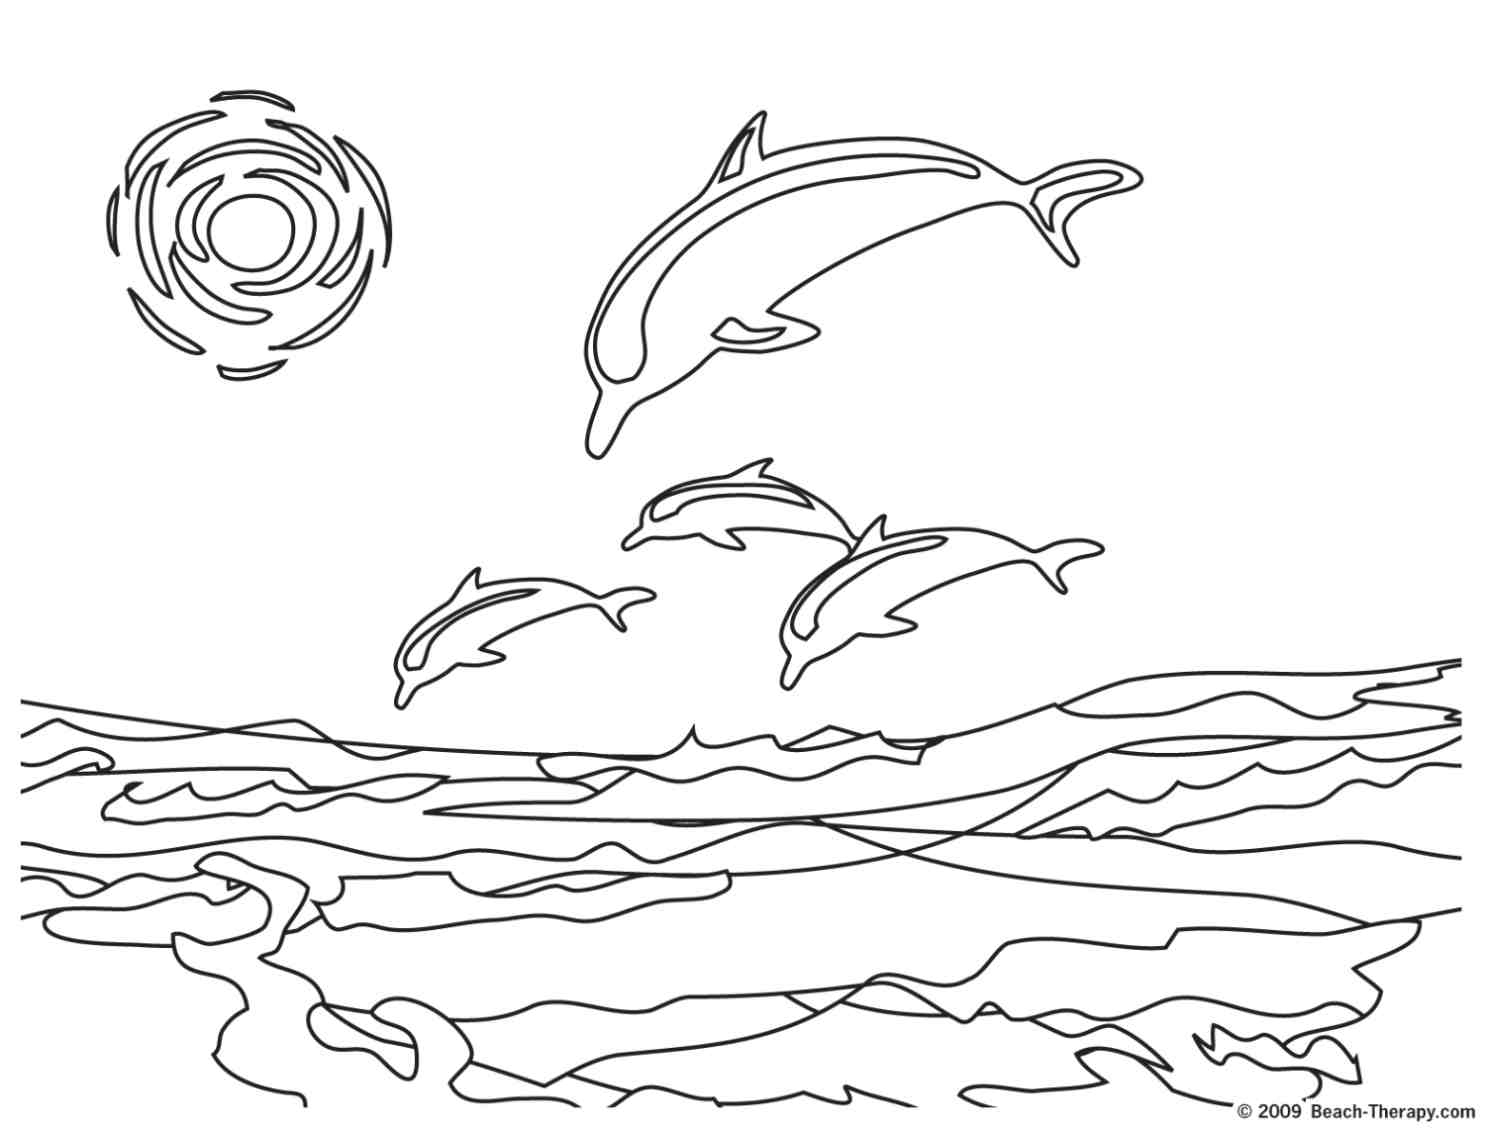 Dolphins For Children - Dolphins Kids Coloring Pages - Dolphin Coloring Sheets Free Printable